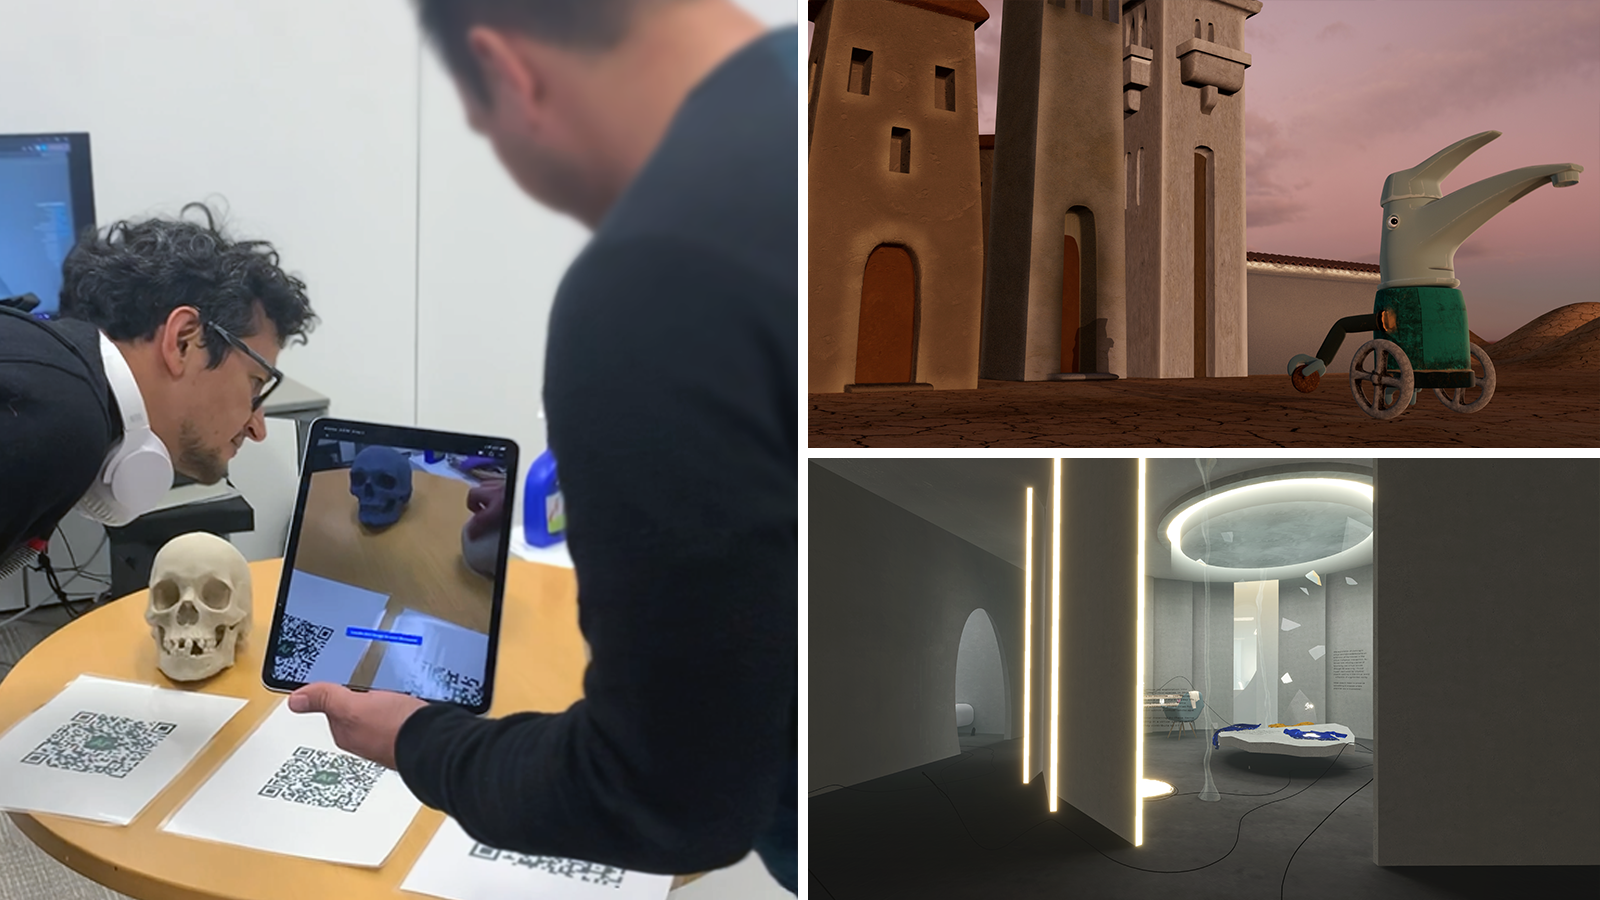 A collage of three photos. On the left is an image of two men looking at an iPad at a VR experience. On the top right is a screenshot of an animation featuring a castle in the background and a personified faucet character in the foreground. The bottom right image shows a screenshot from a VR experience, displaying a look into a room.